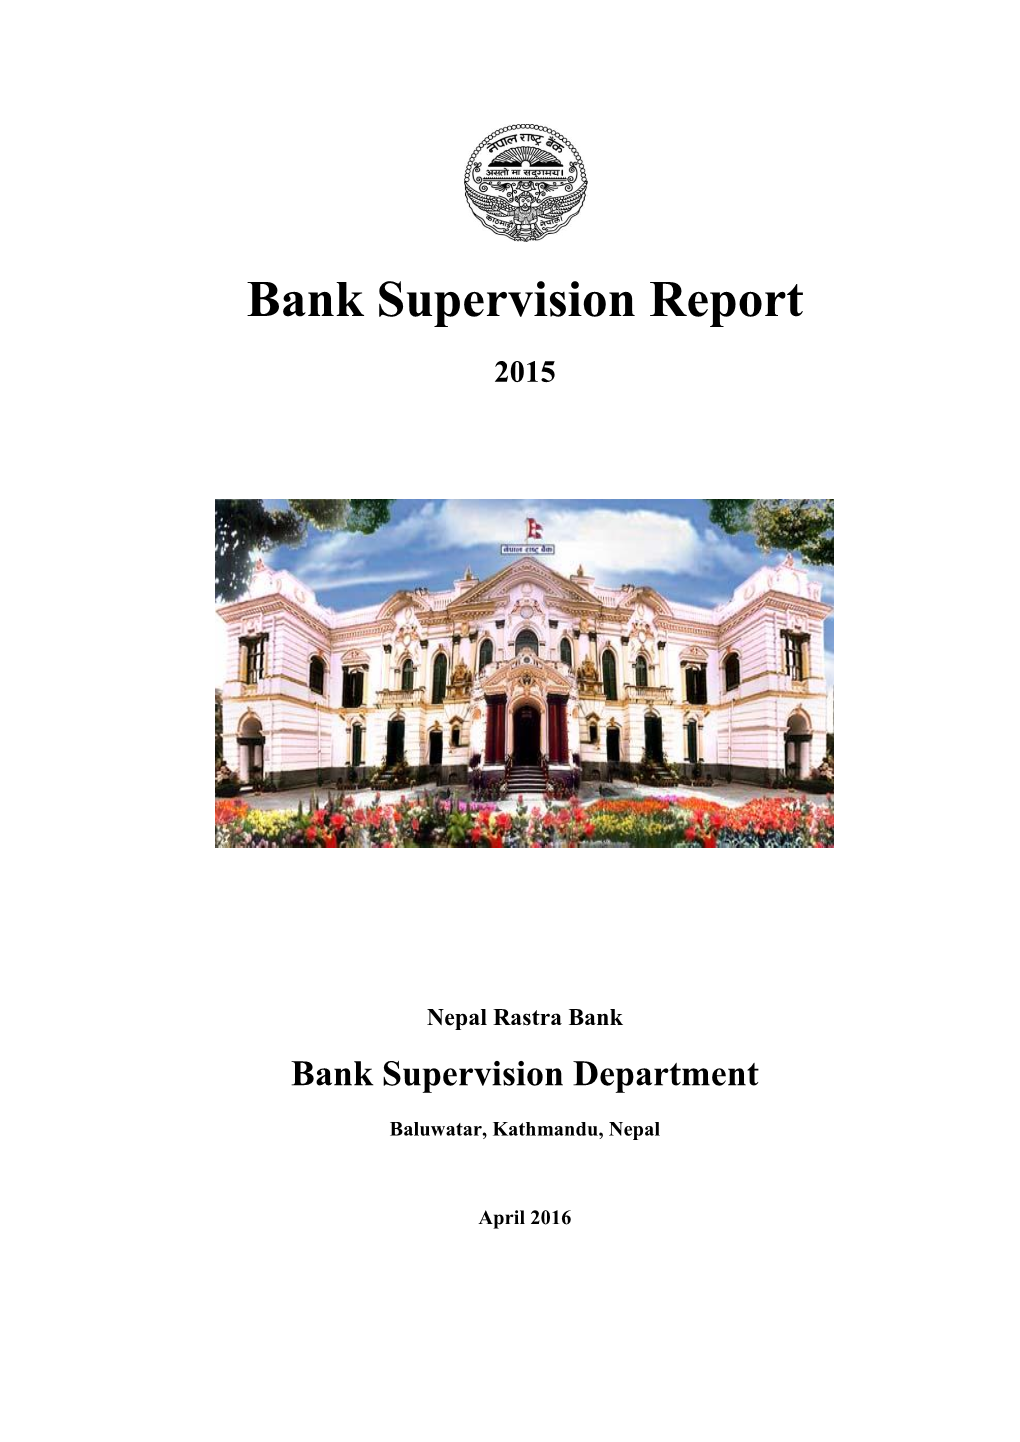 Annual Bank Supervision Report 2015